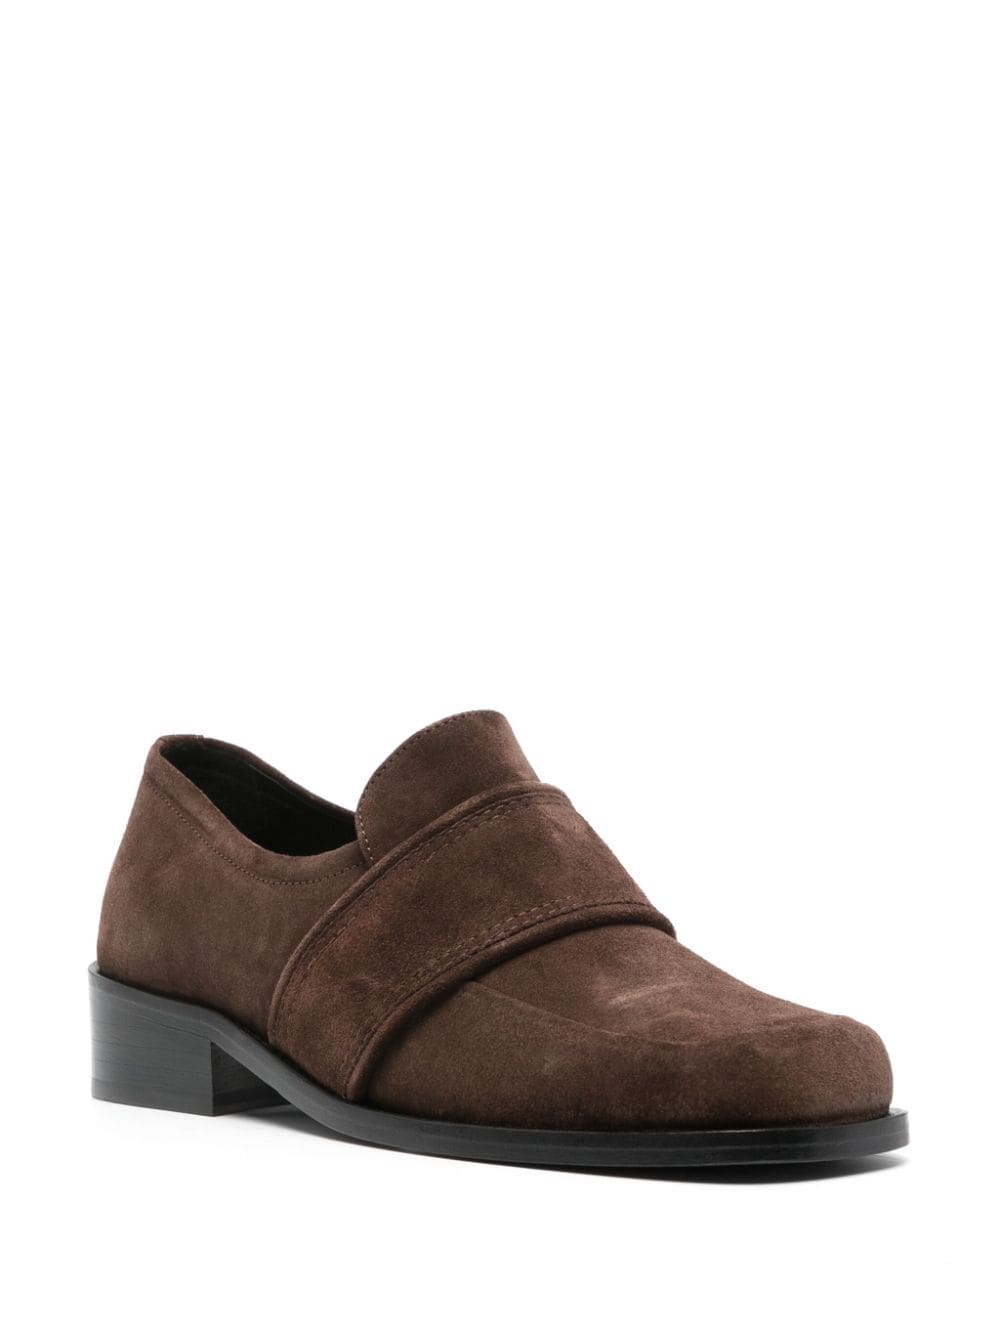 BY FAR Cyril suede loafers - Bruin